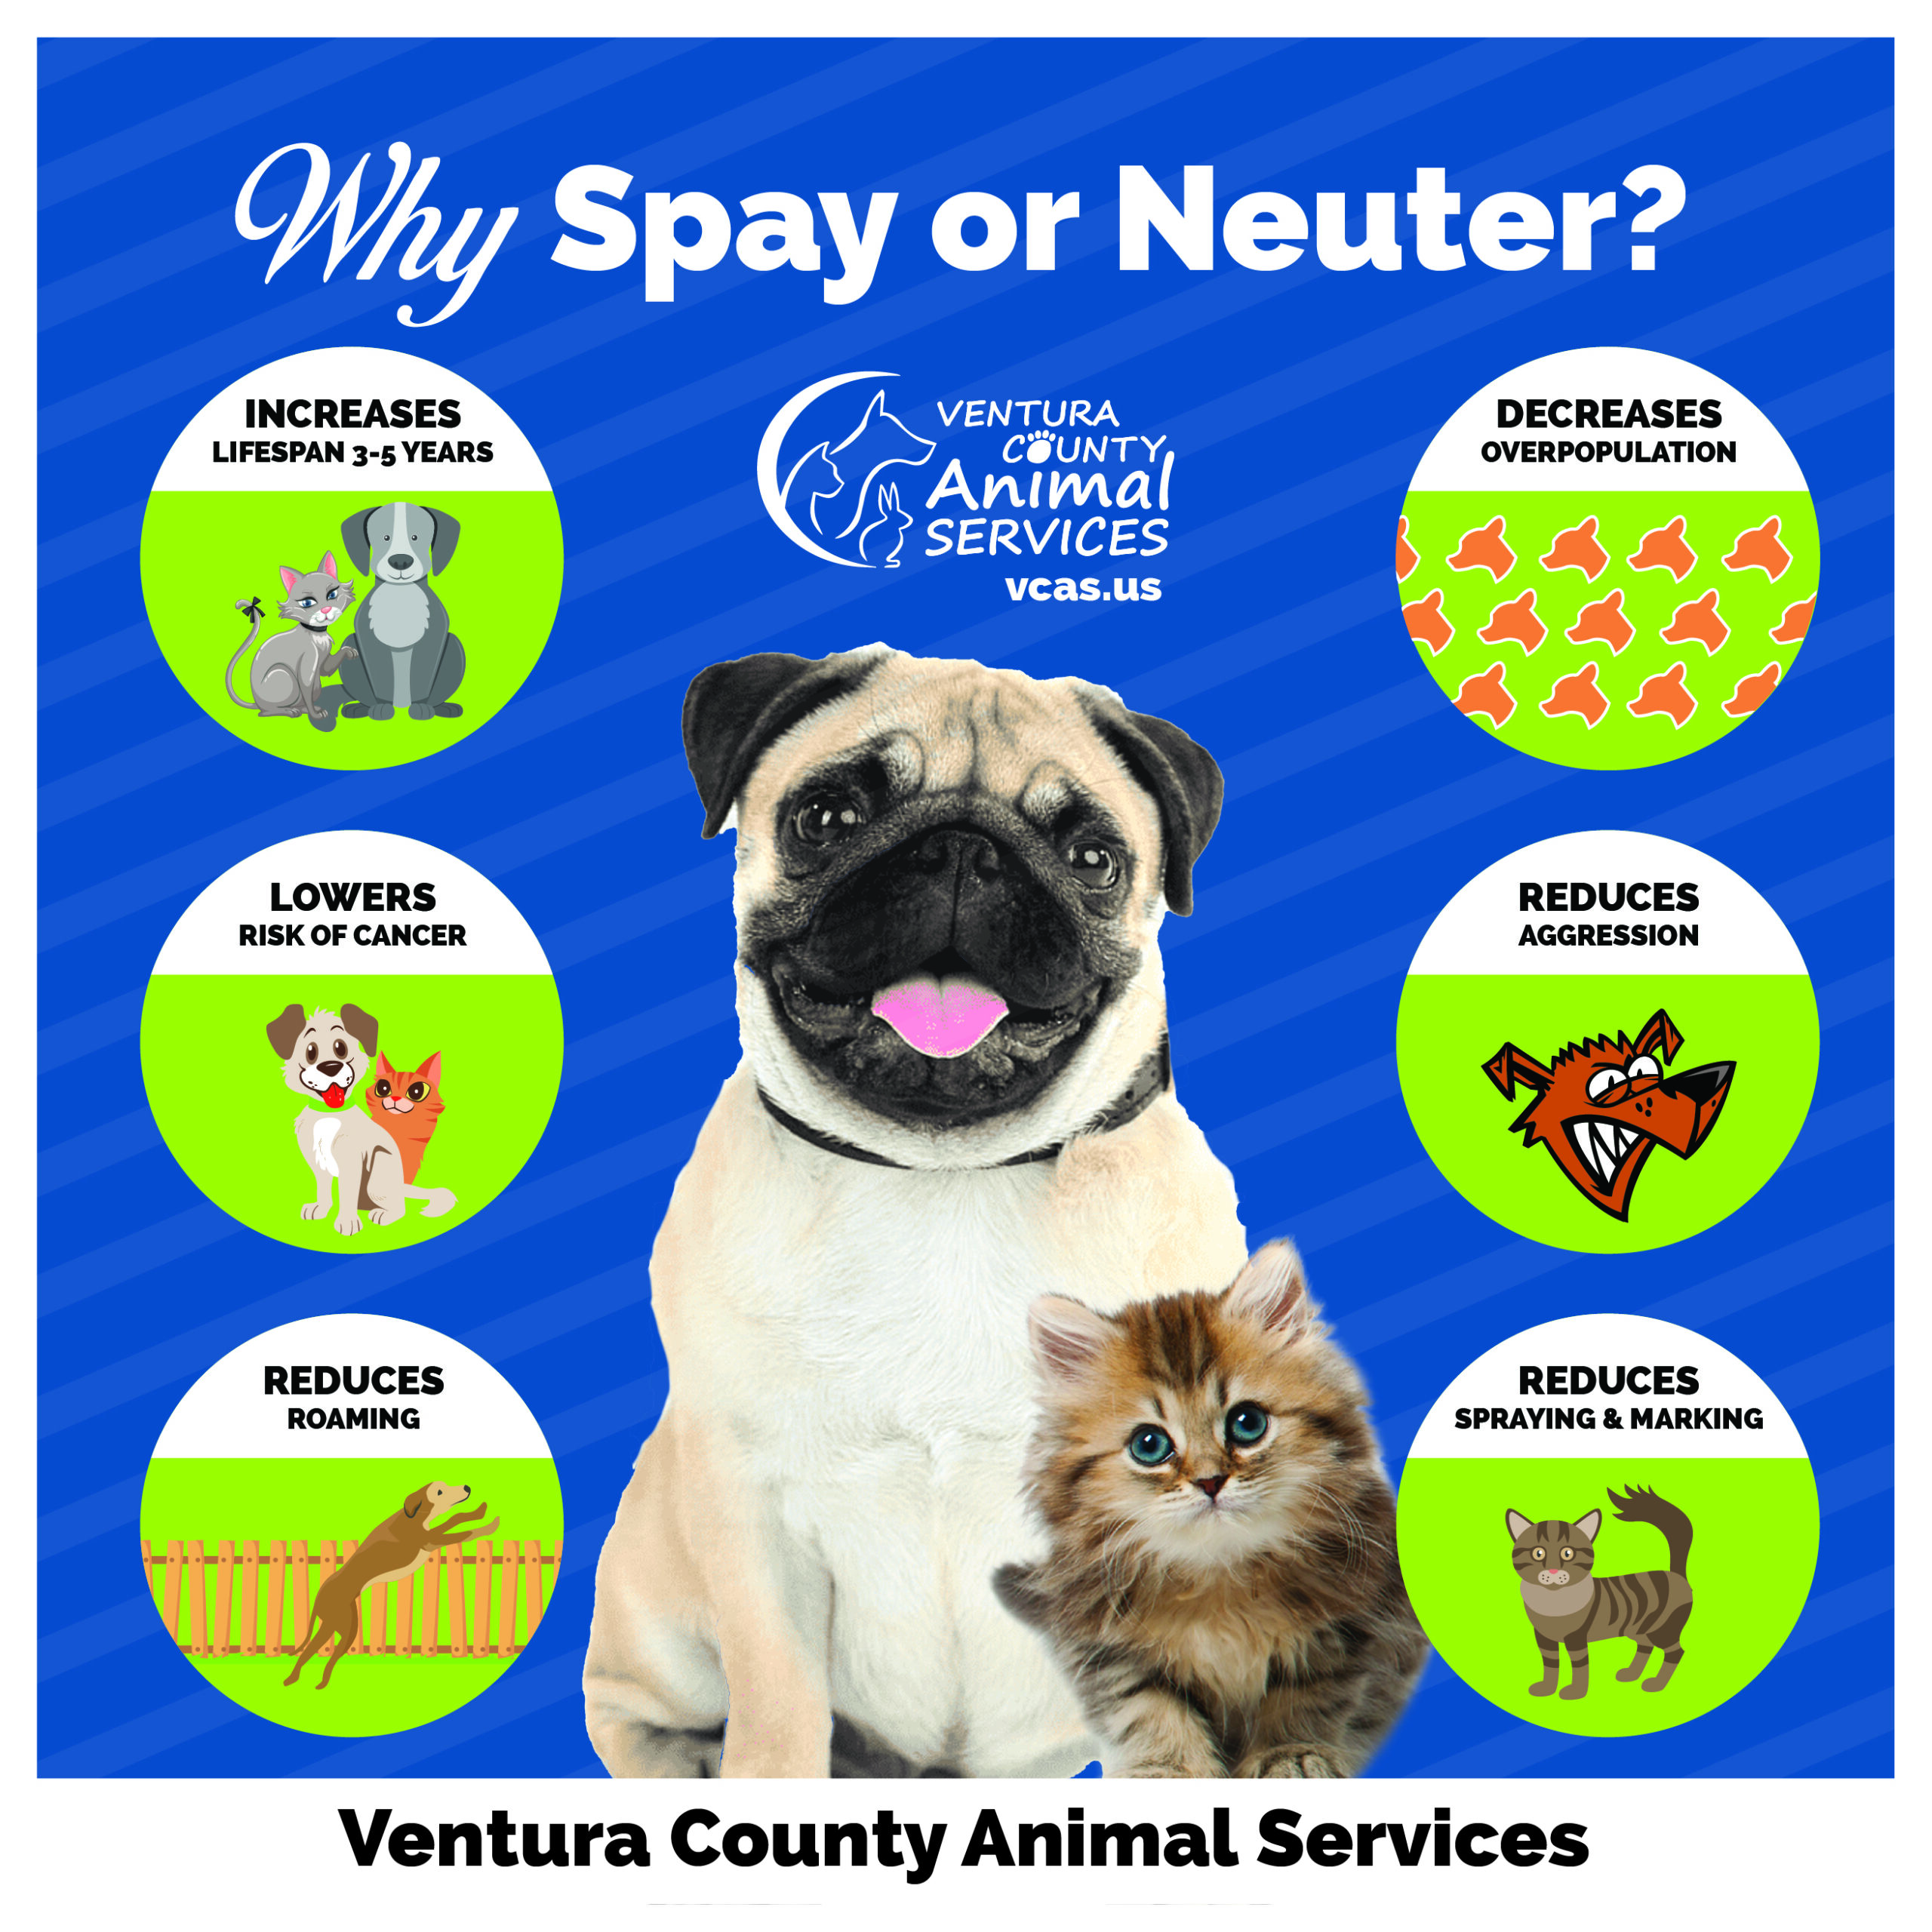 Spay and Neuter Ventura County Animal Services